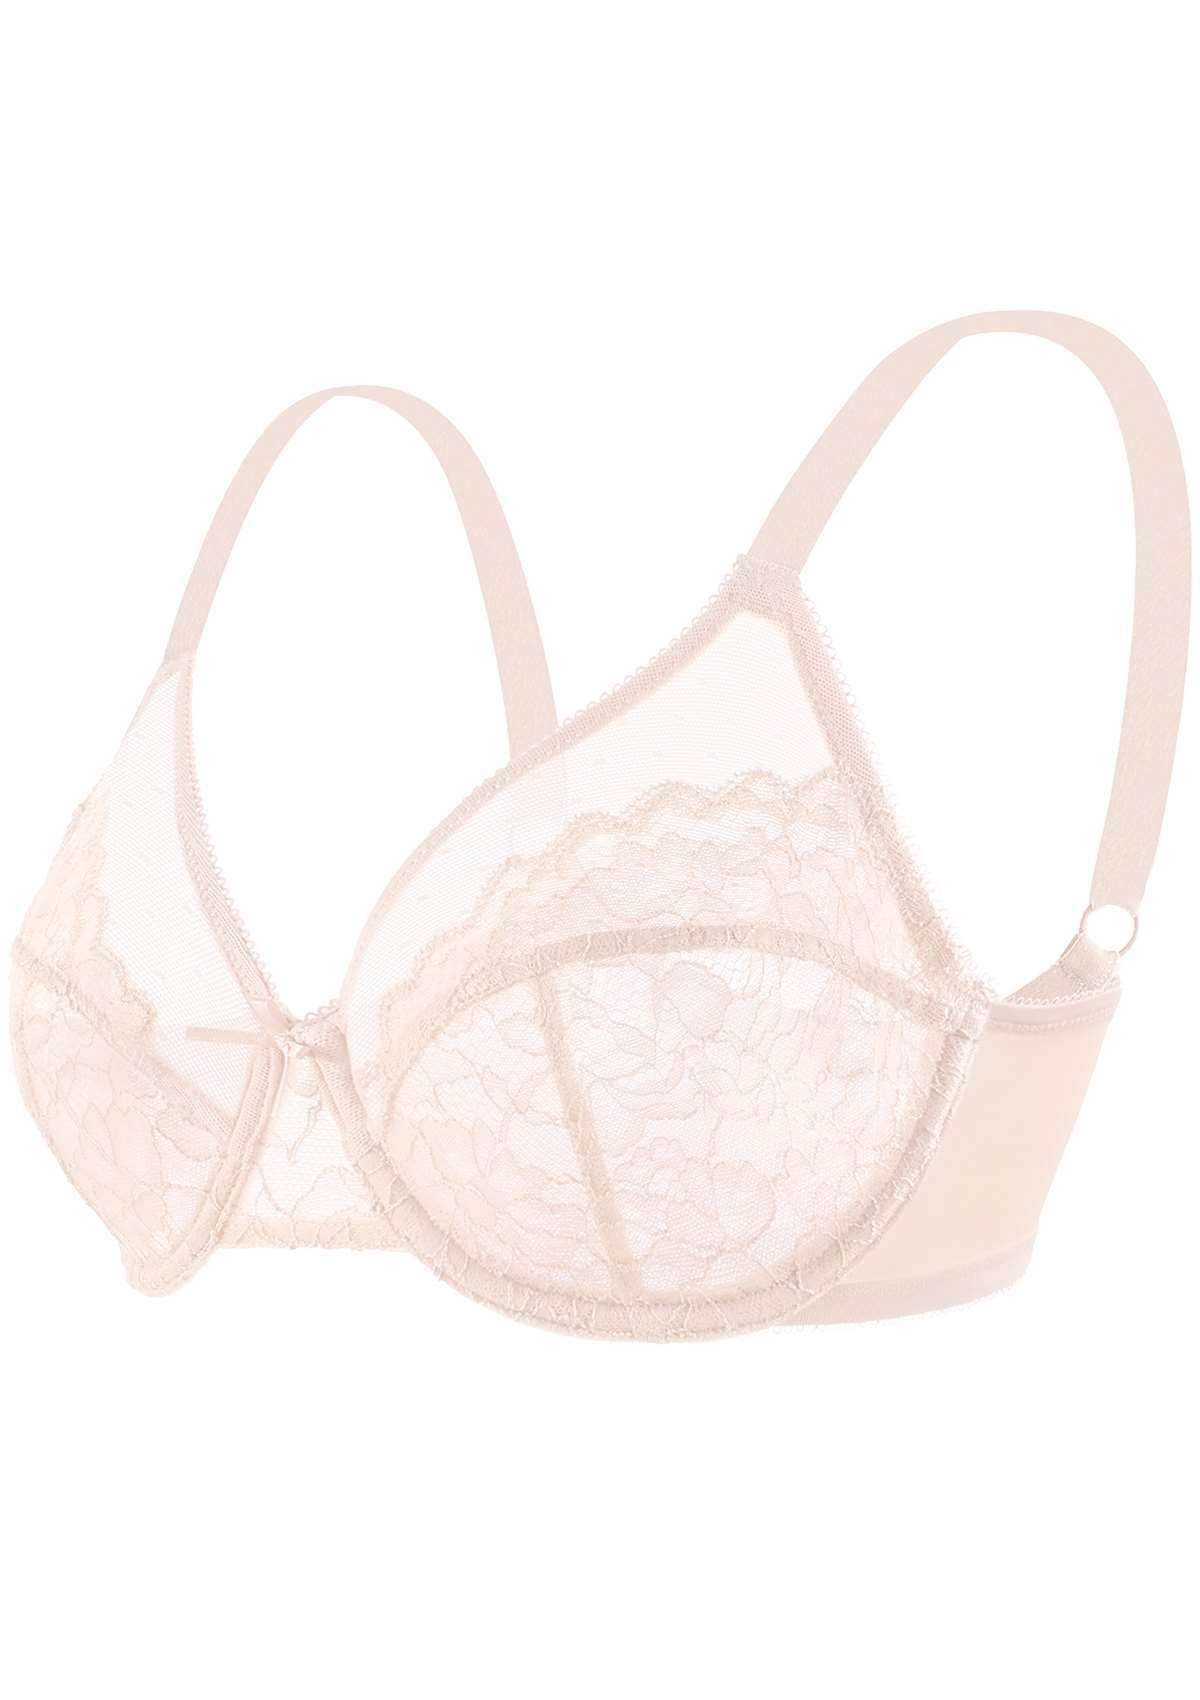 HSIA Enchante Lacy Bra: Comfy Sheer Lace Bra With Lift - Dusty Peach / 36 / C